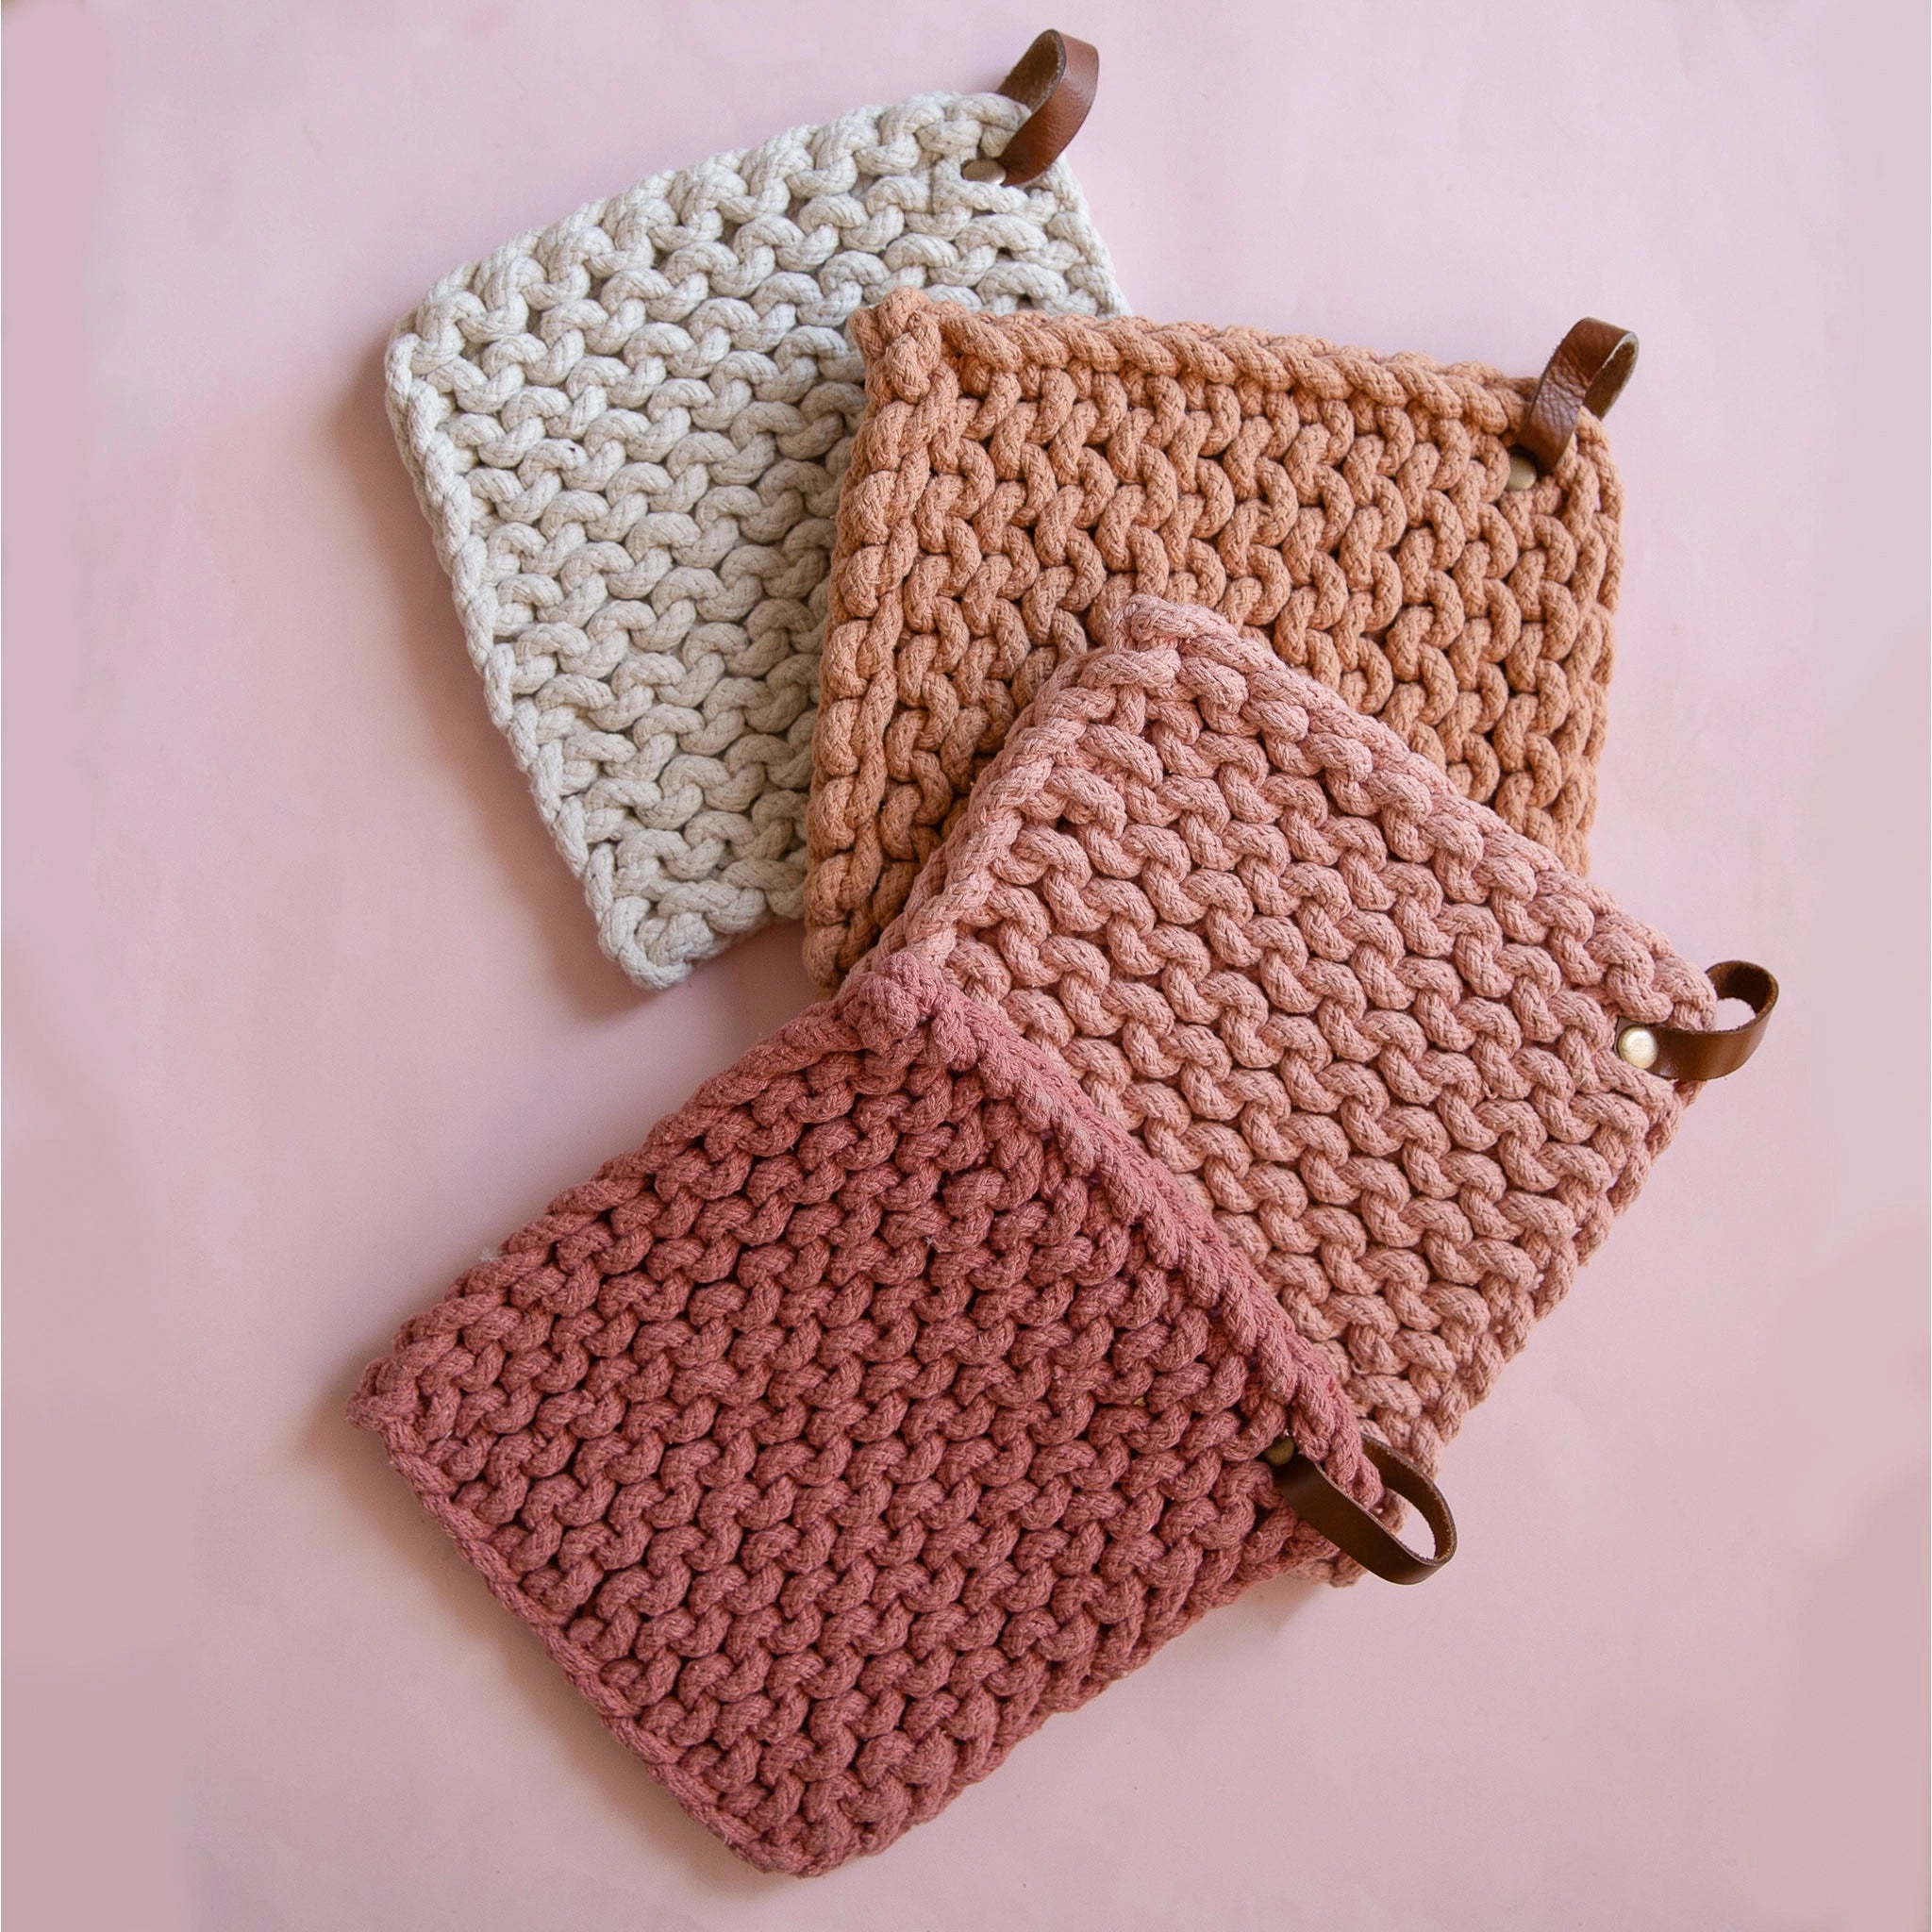 On a pink background is four crocheted pot holders in four different shades. There is an ivory, two pink shades, and a terracotta shade.